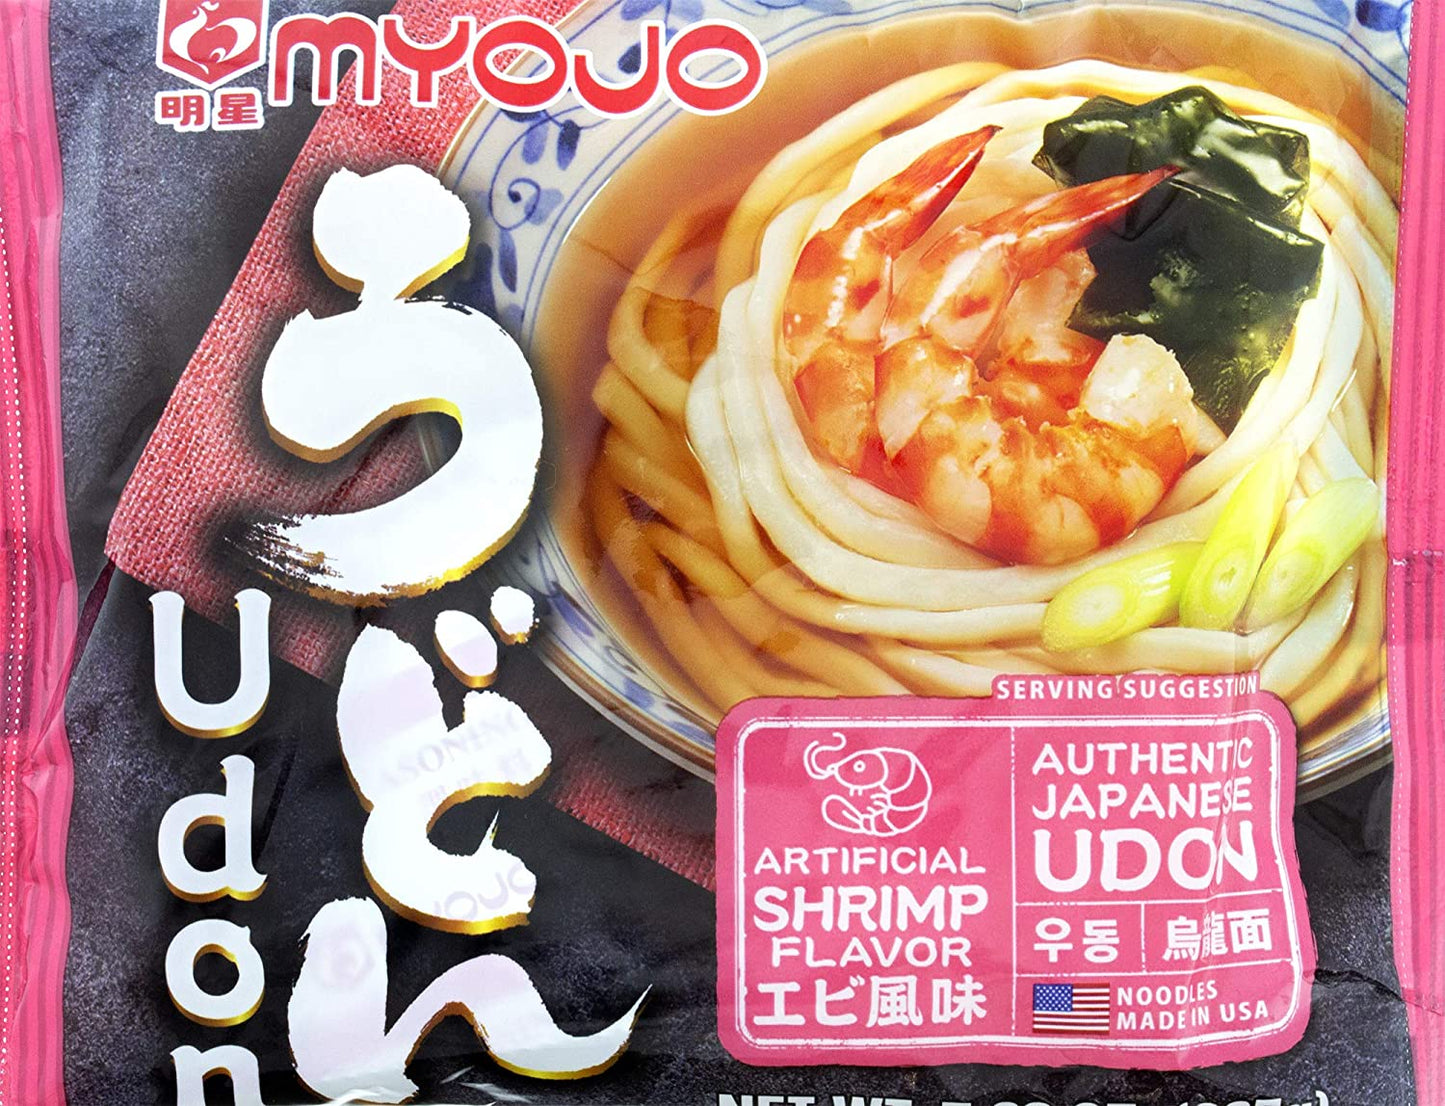 Myojo Udon Japanese Style Noodles with Soup Base, Shrimp Flavor, 7.23 Ounce (Pack of 15)